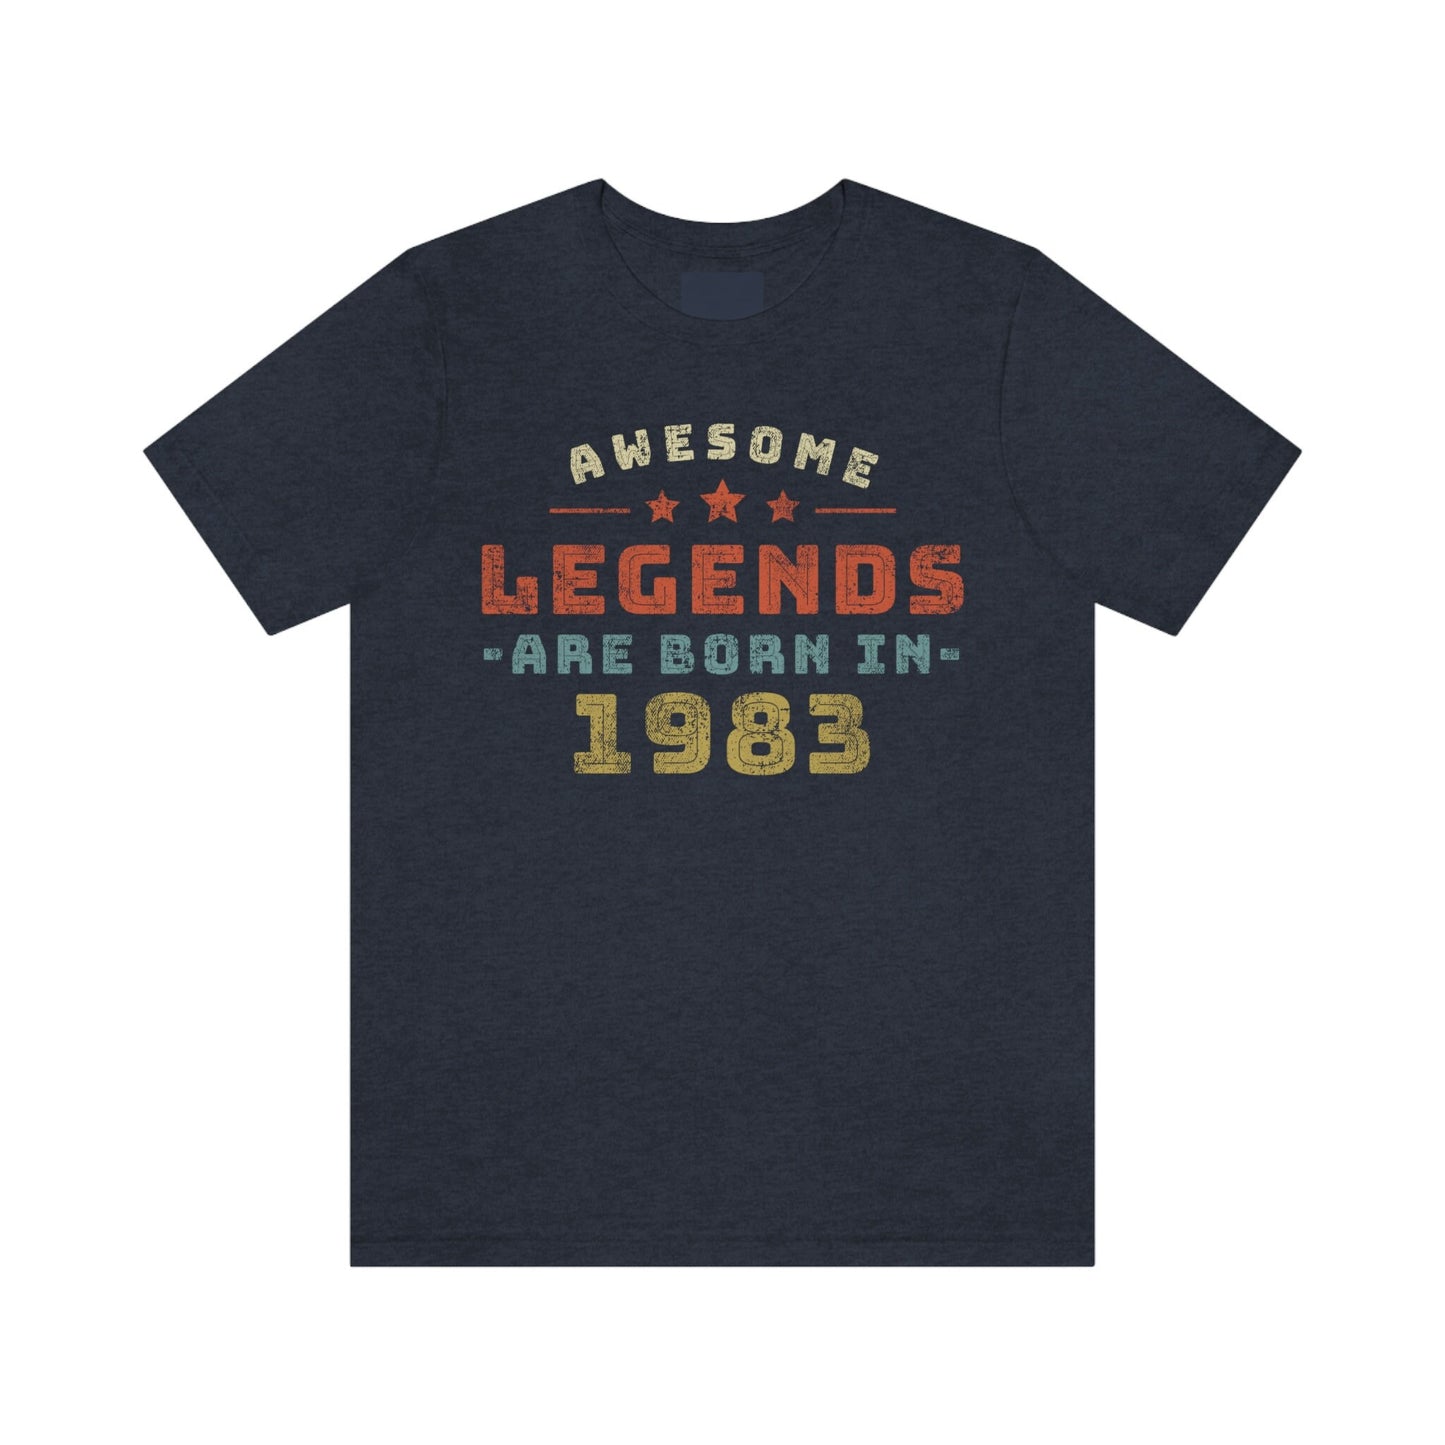 Awesome Legends are born in 1983 birthday shirt for women or men, Gift shirt for wife or husband